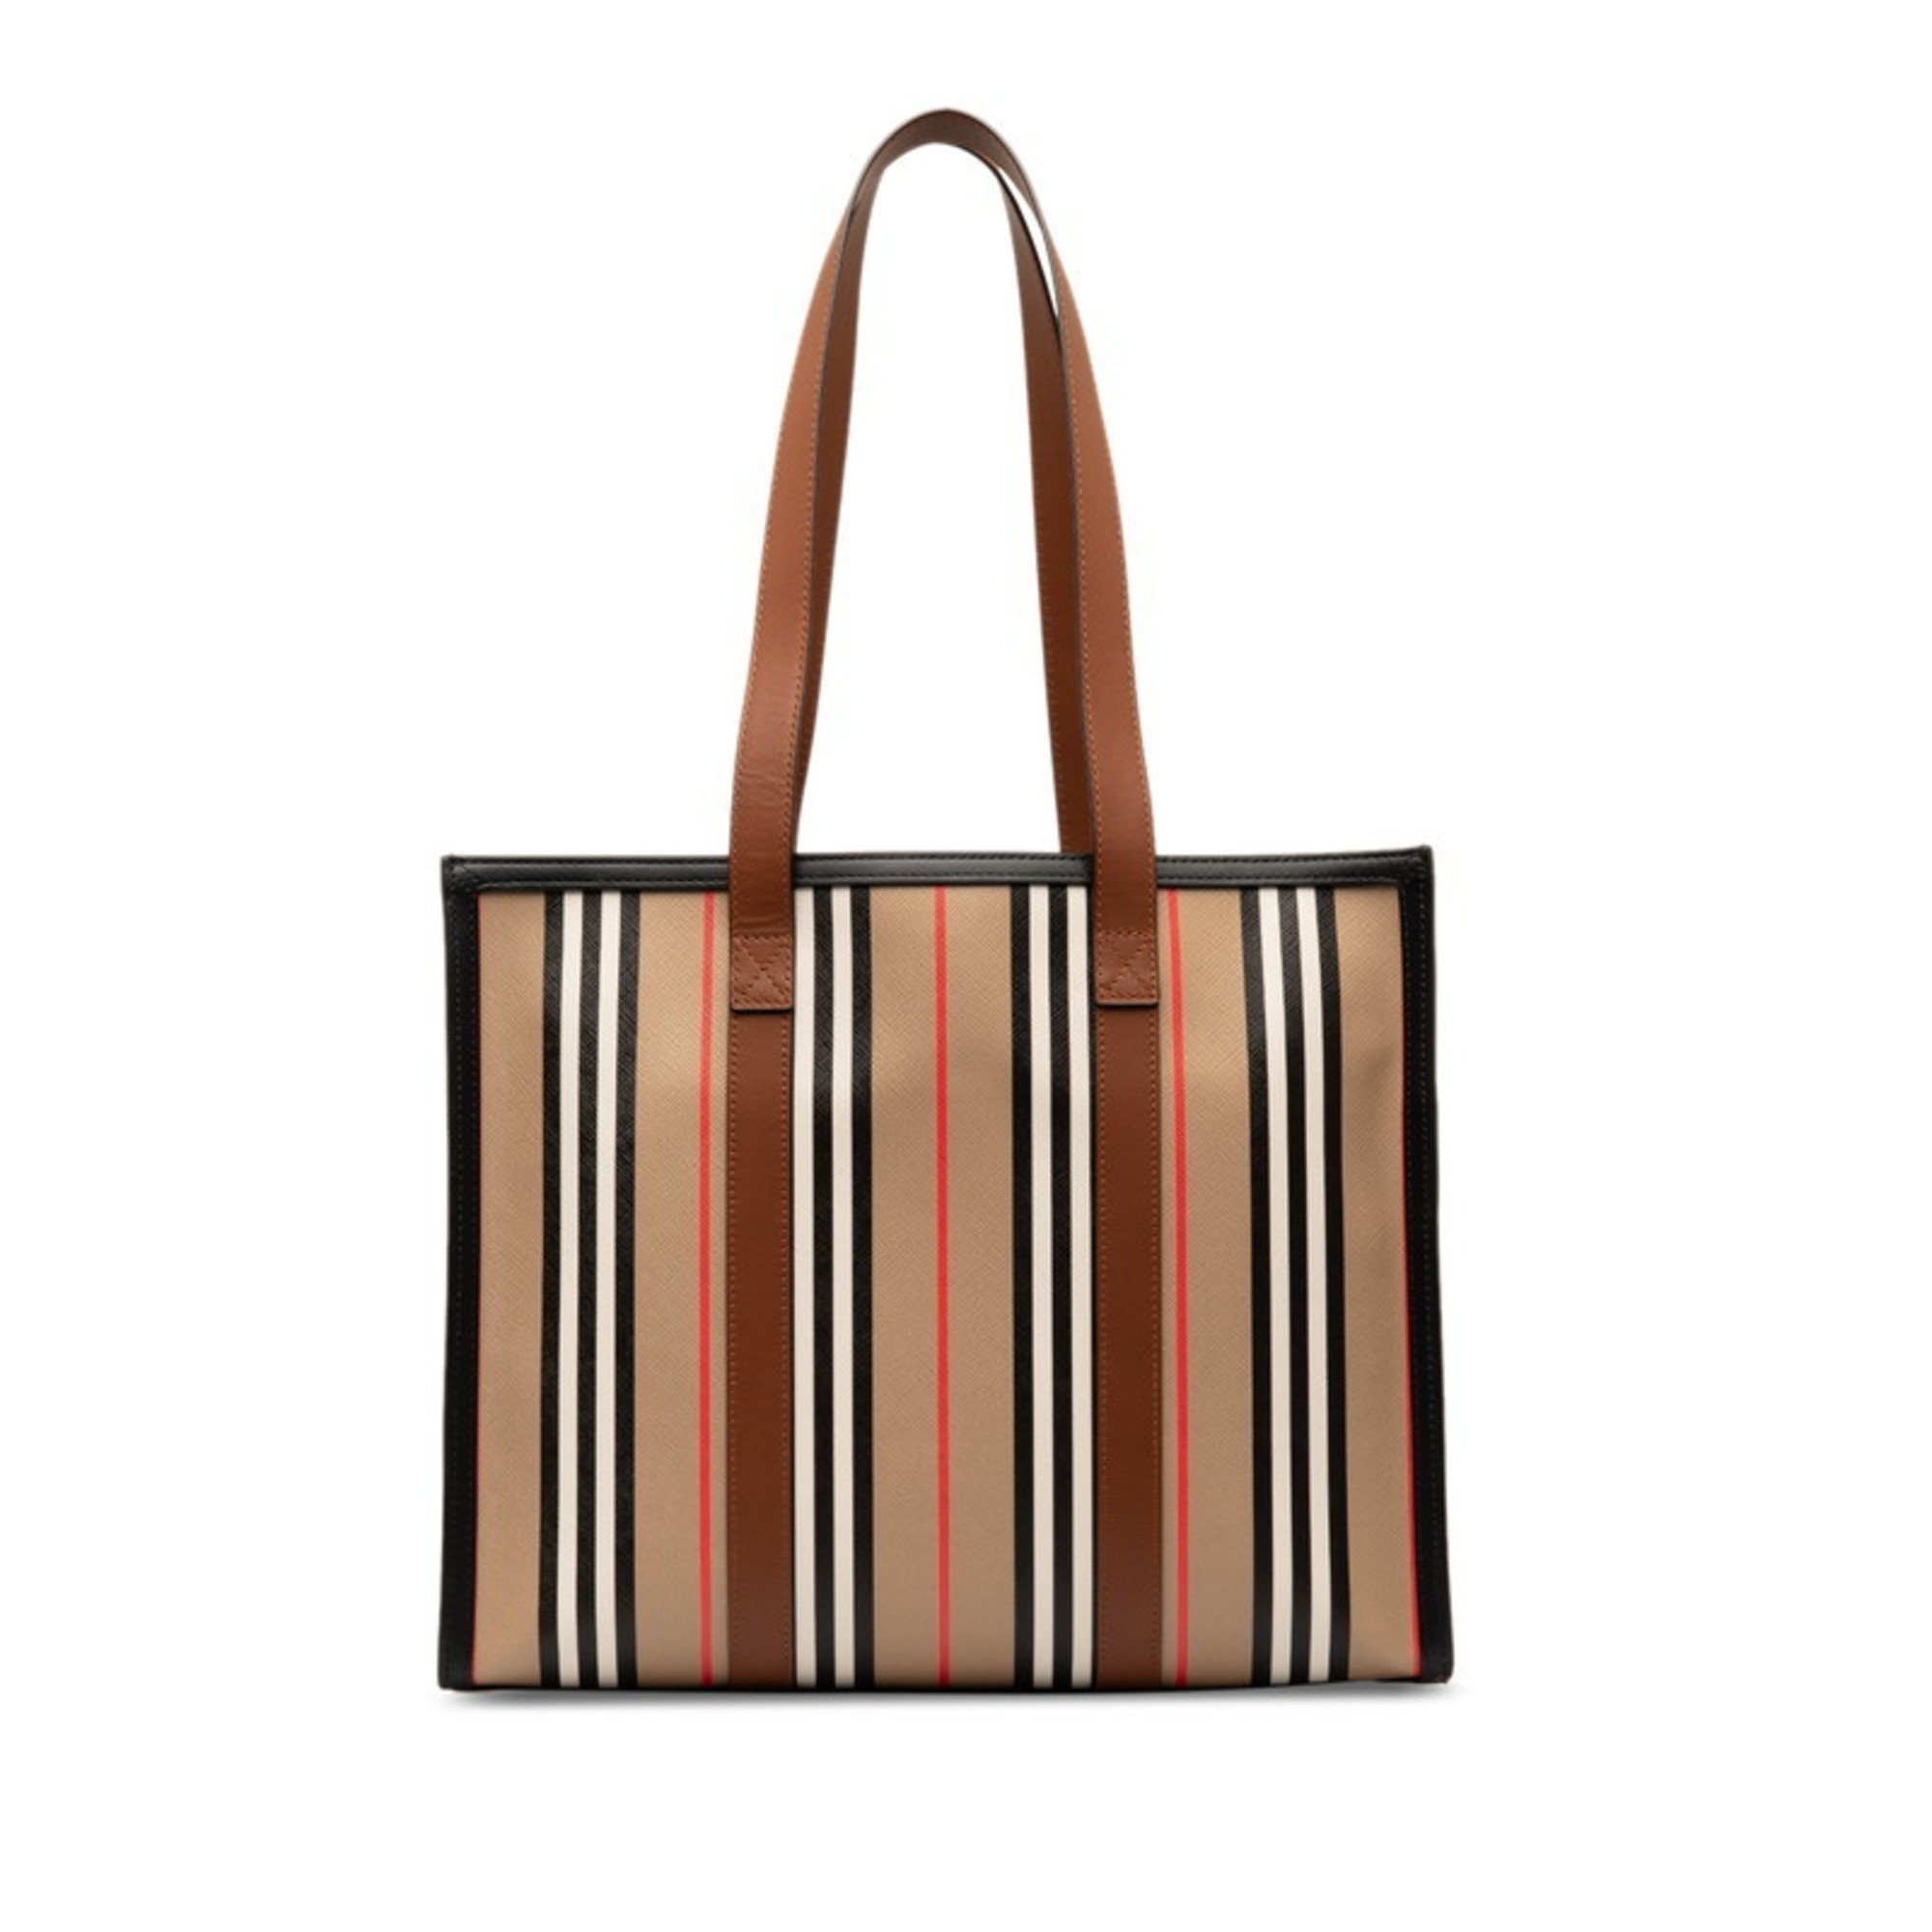 Burberry Striped Tote Bag Shoulder 80730571 Brown Black PVC Leather Women's BURBERRY